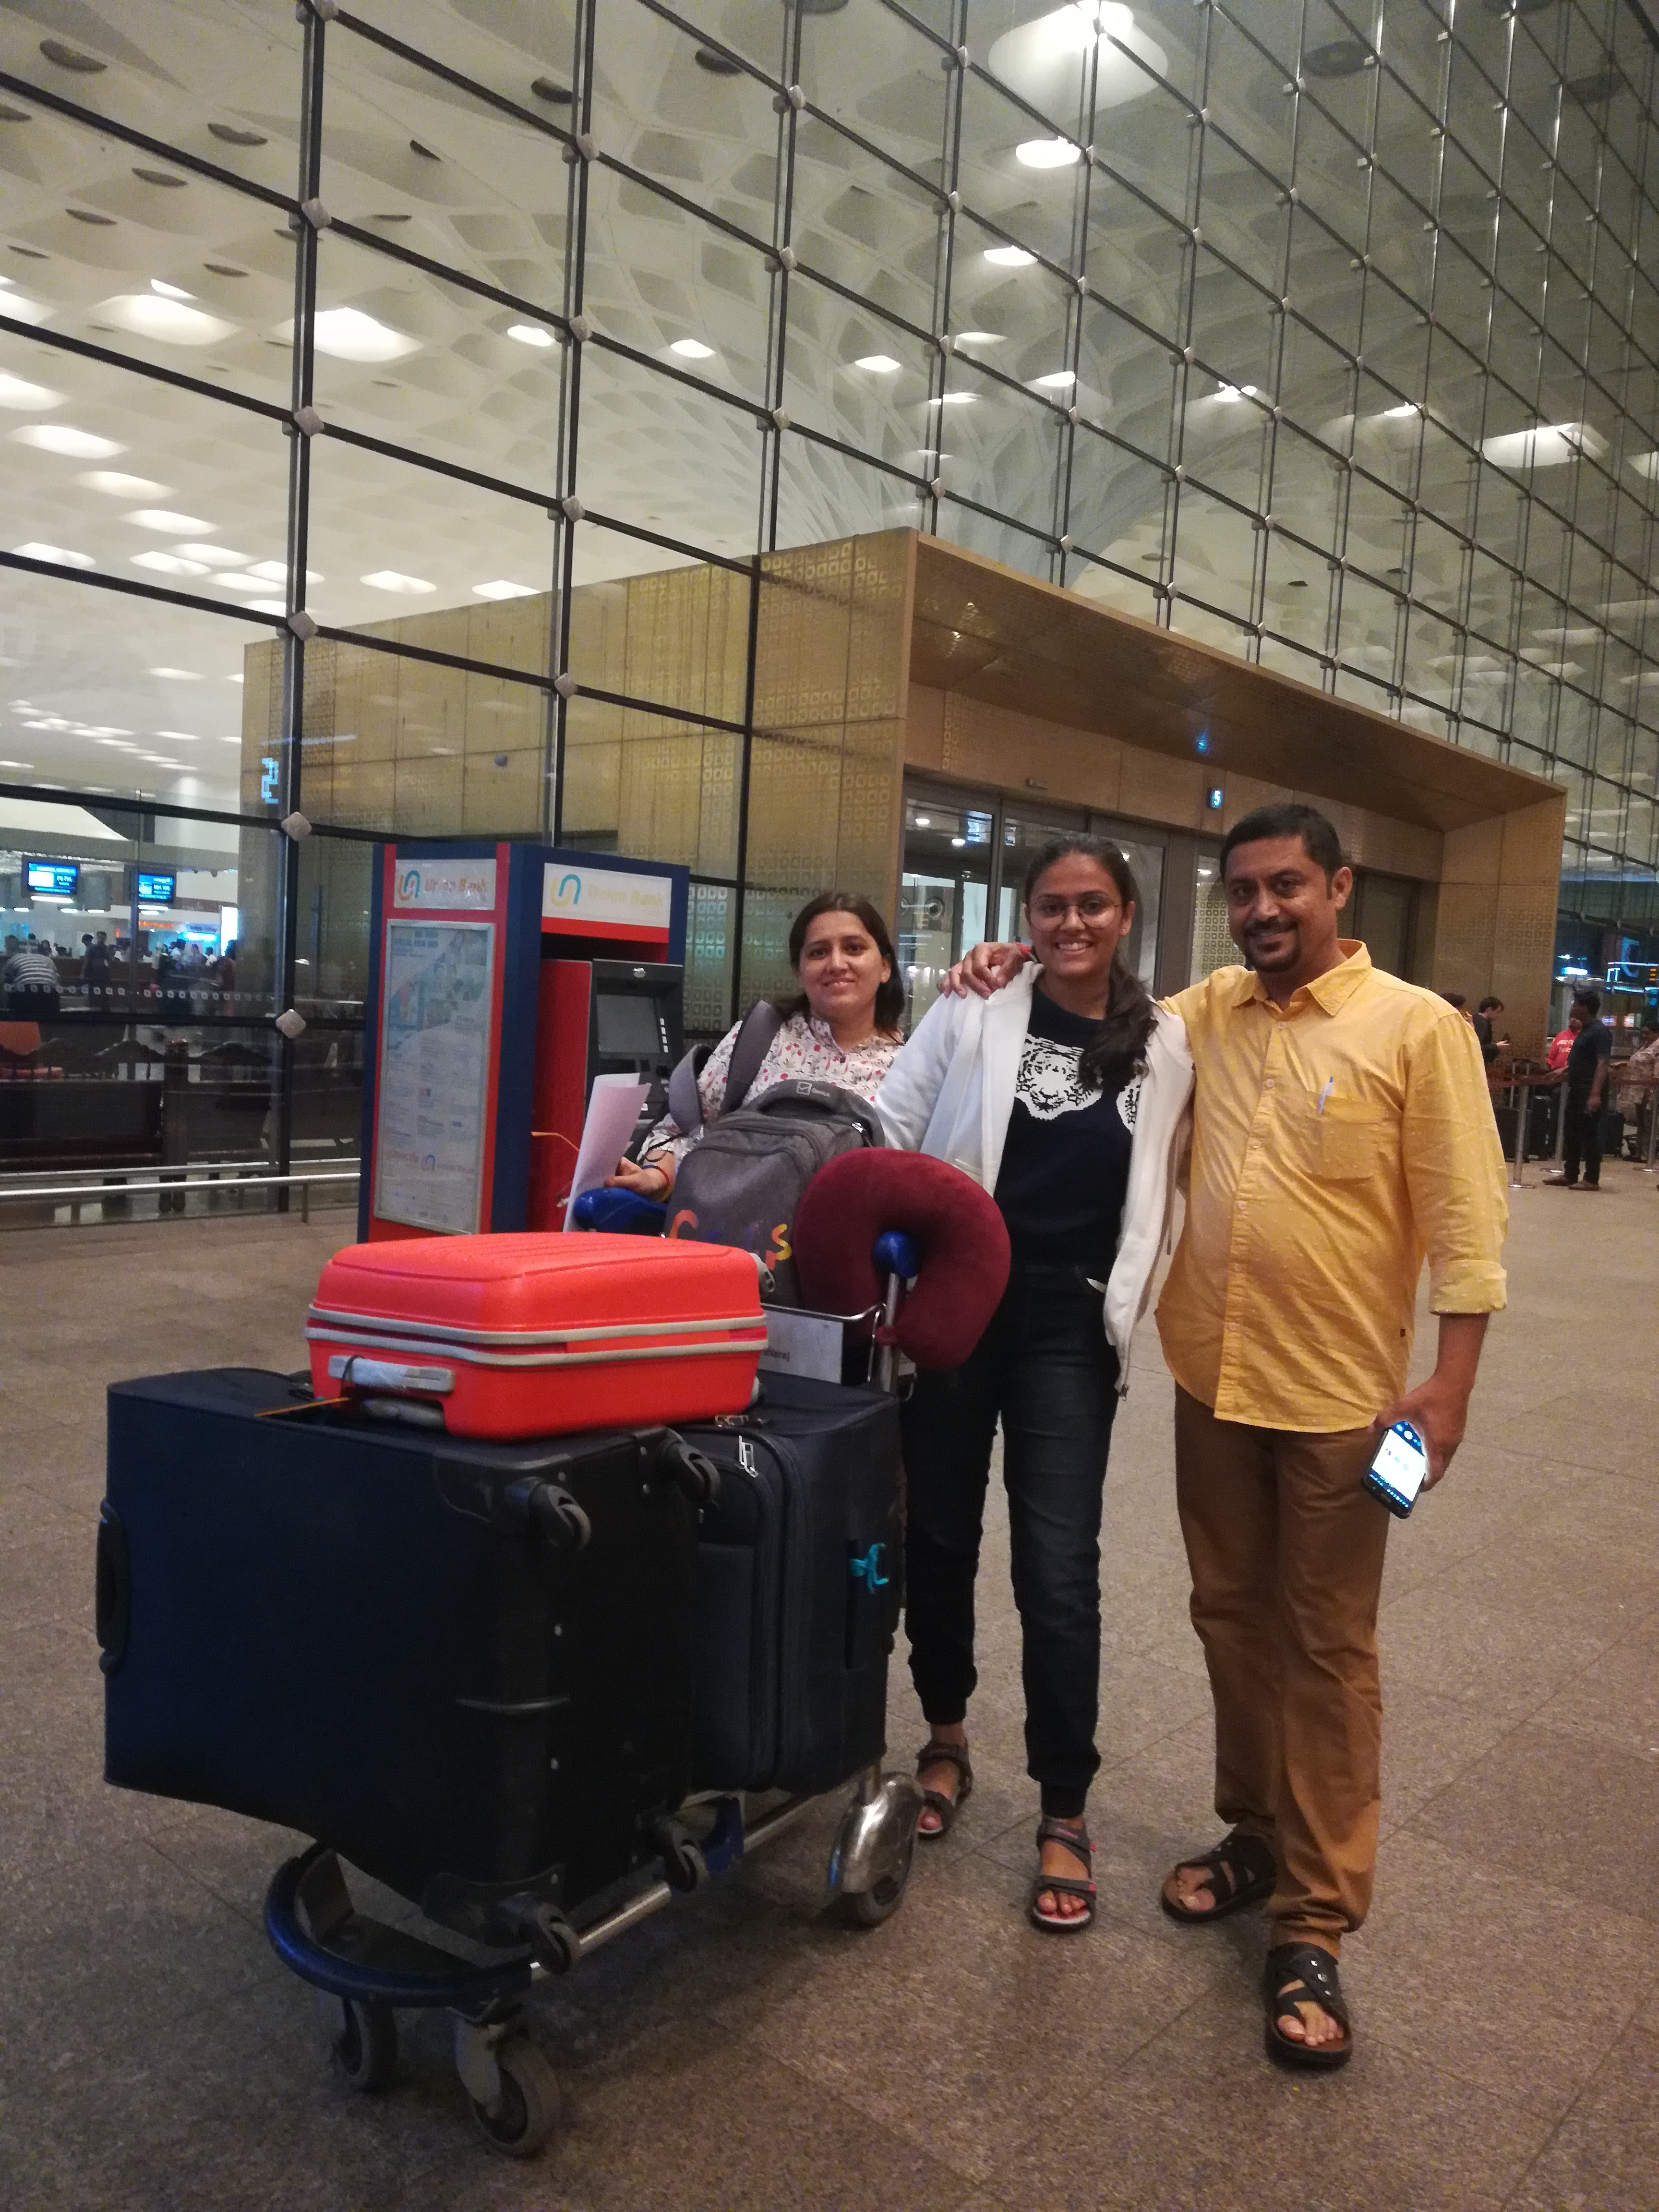 Sakshi with her parents at the airport in India before departing for school